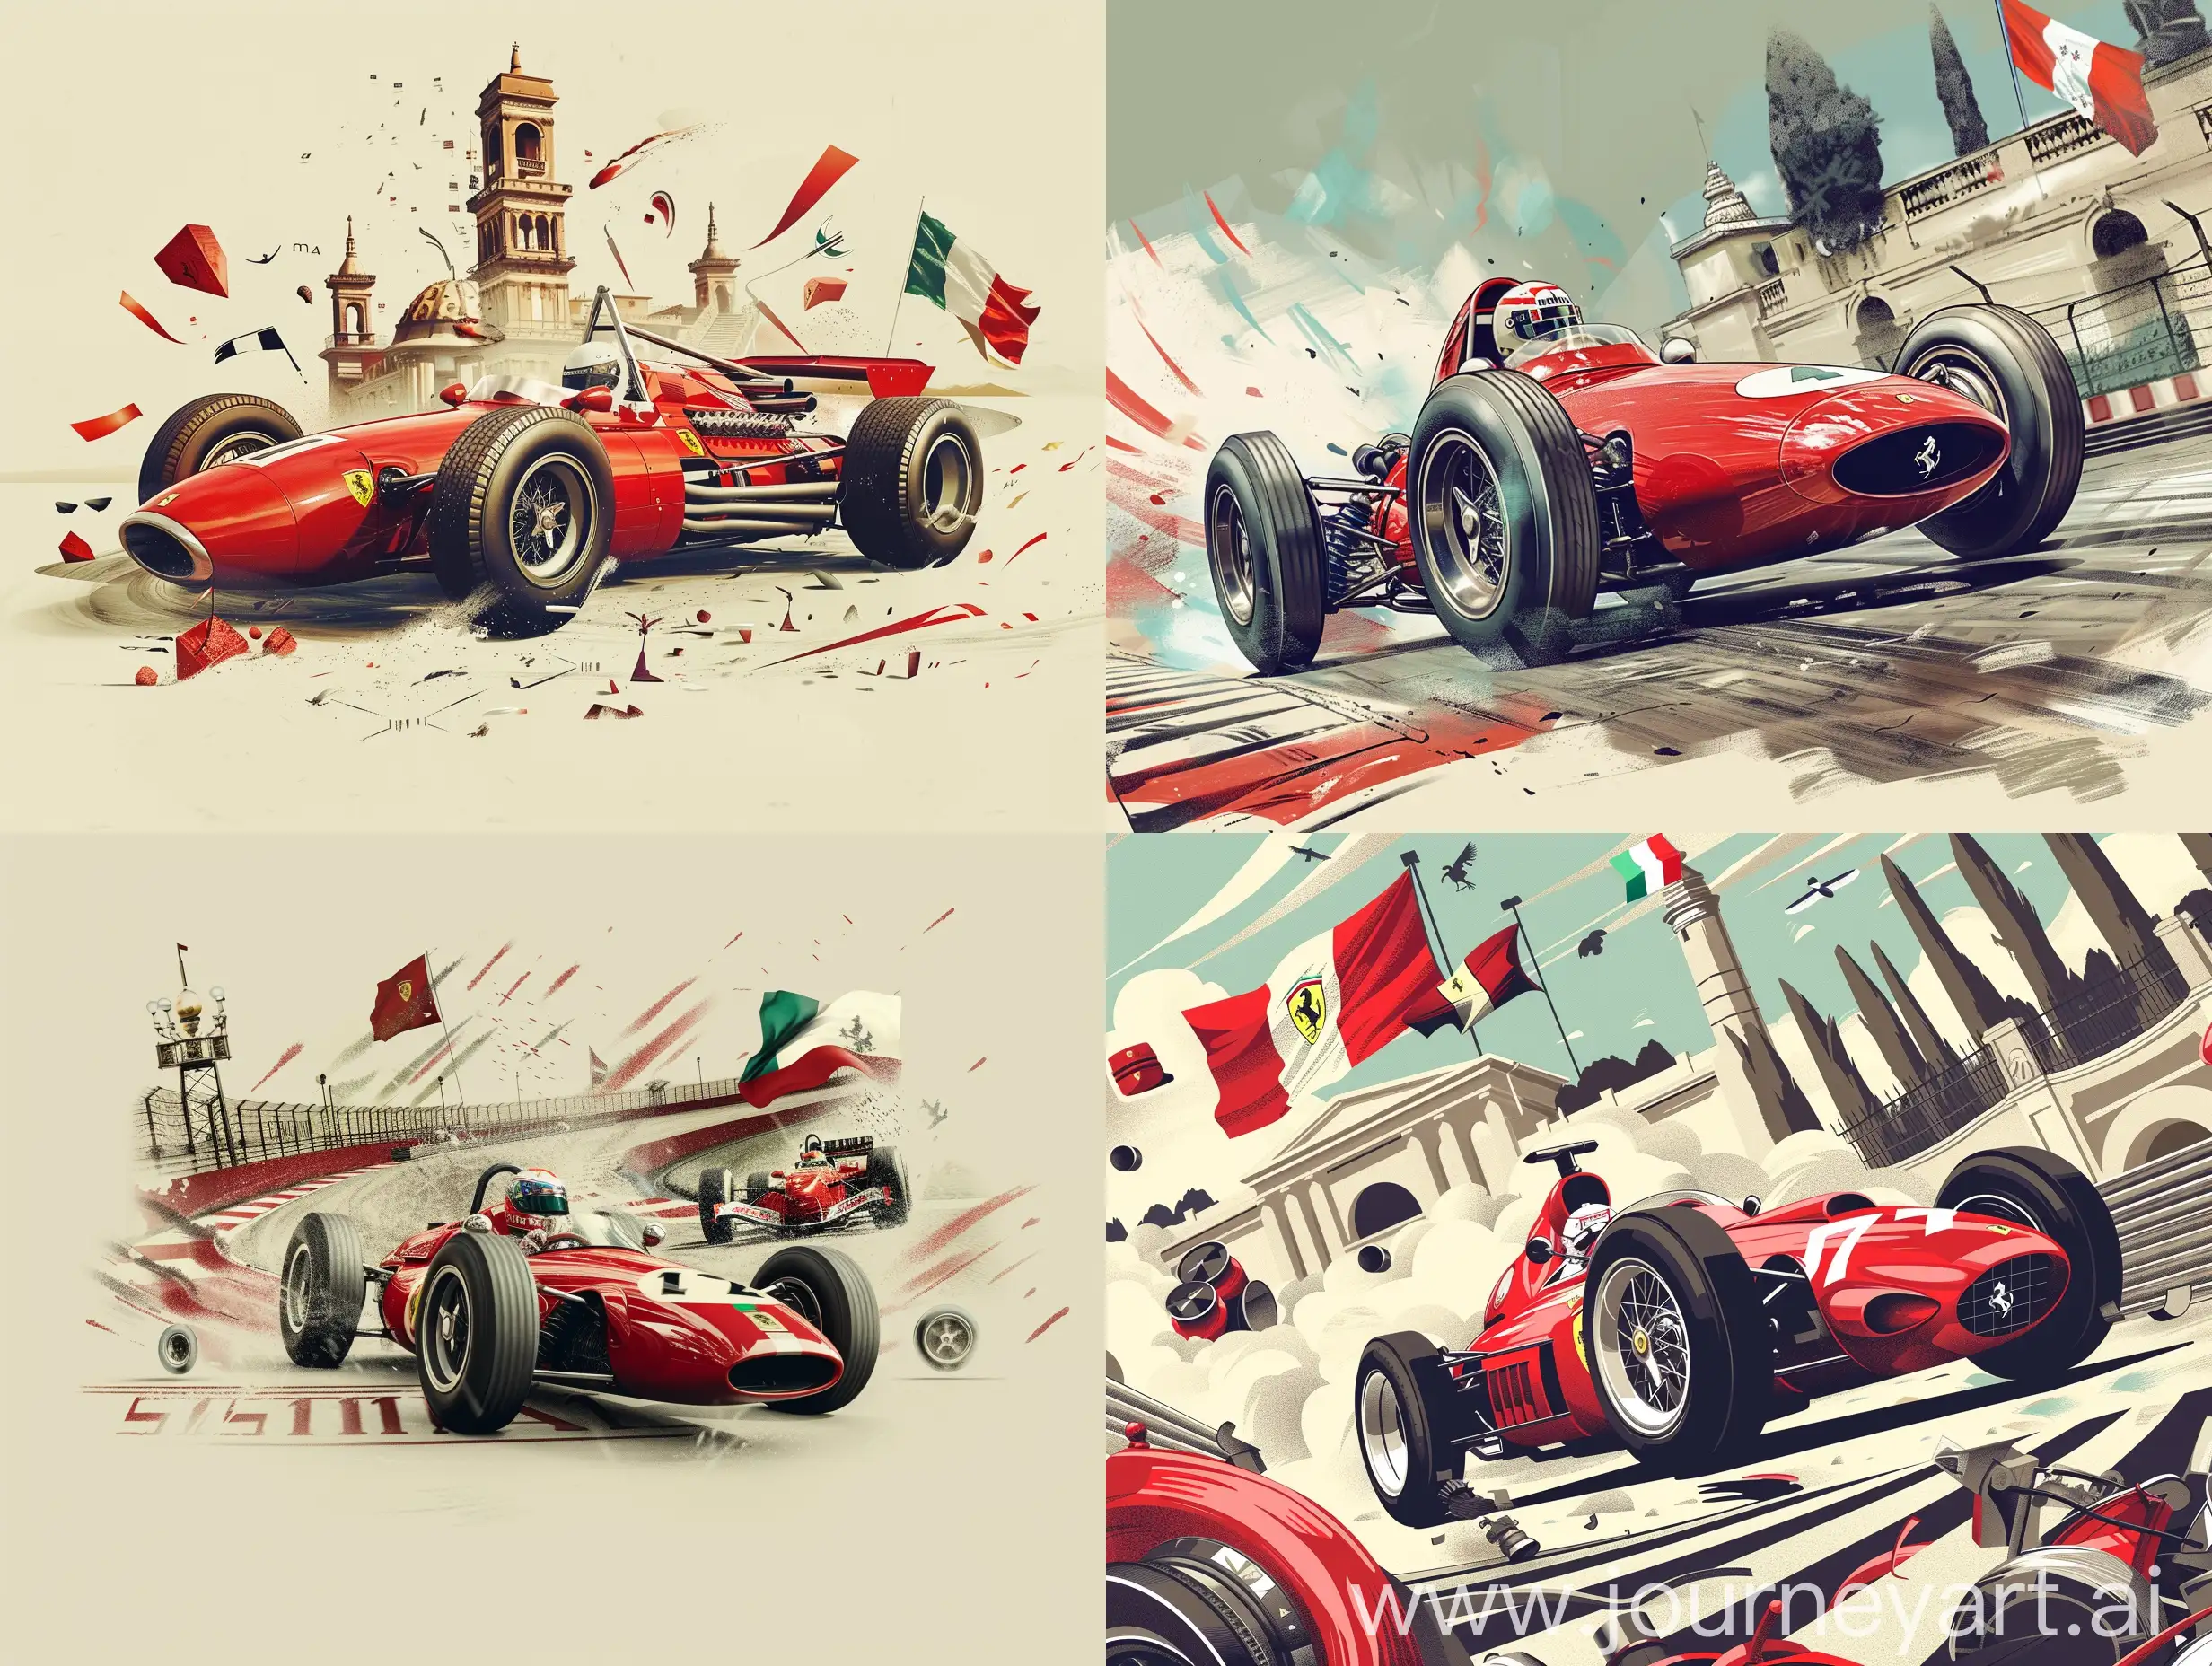 For capturing the essence of Ferrari and its storied history in Formula 1, envisioning an image that embodies their iconic red racing cars, the passion, speed, and innovation that Ferrari represents would be the goal. We can think of a scene that might include elements like a vintage or modern Ferrari F1 car, perhaps with hints of the Italian flag, racing on a historic track, or surrounded by symbols of its numerous victories and contributions to motorsport.